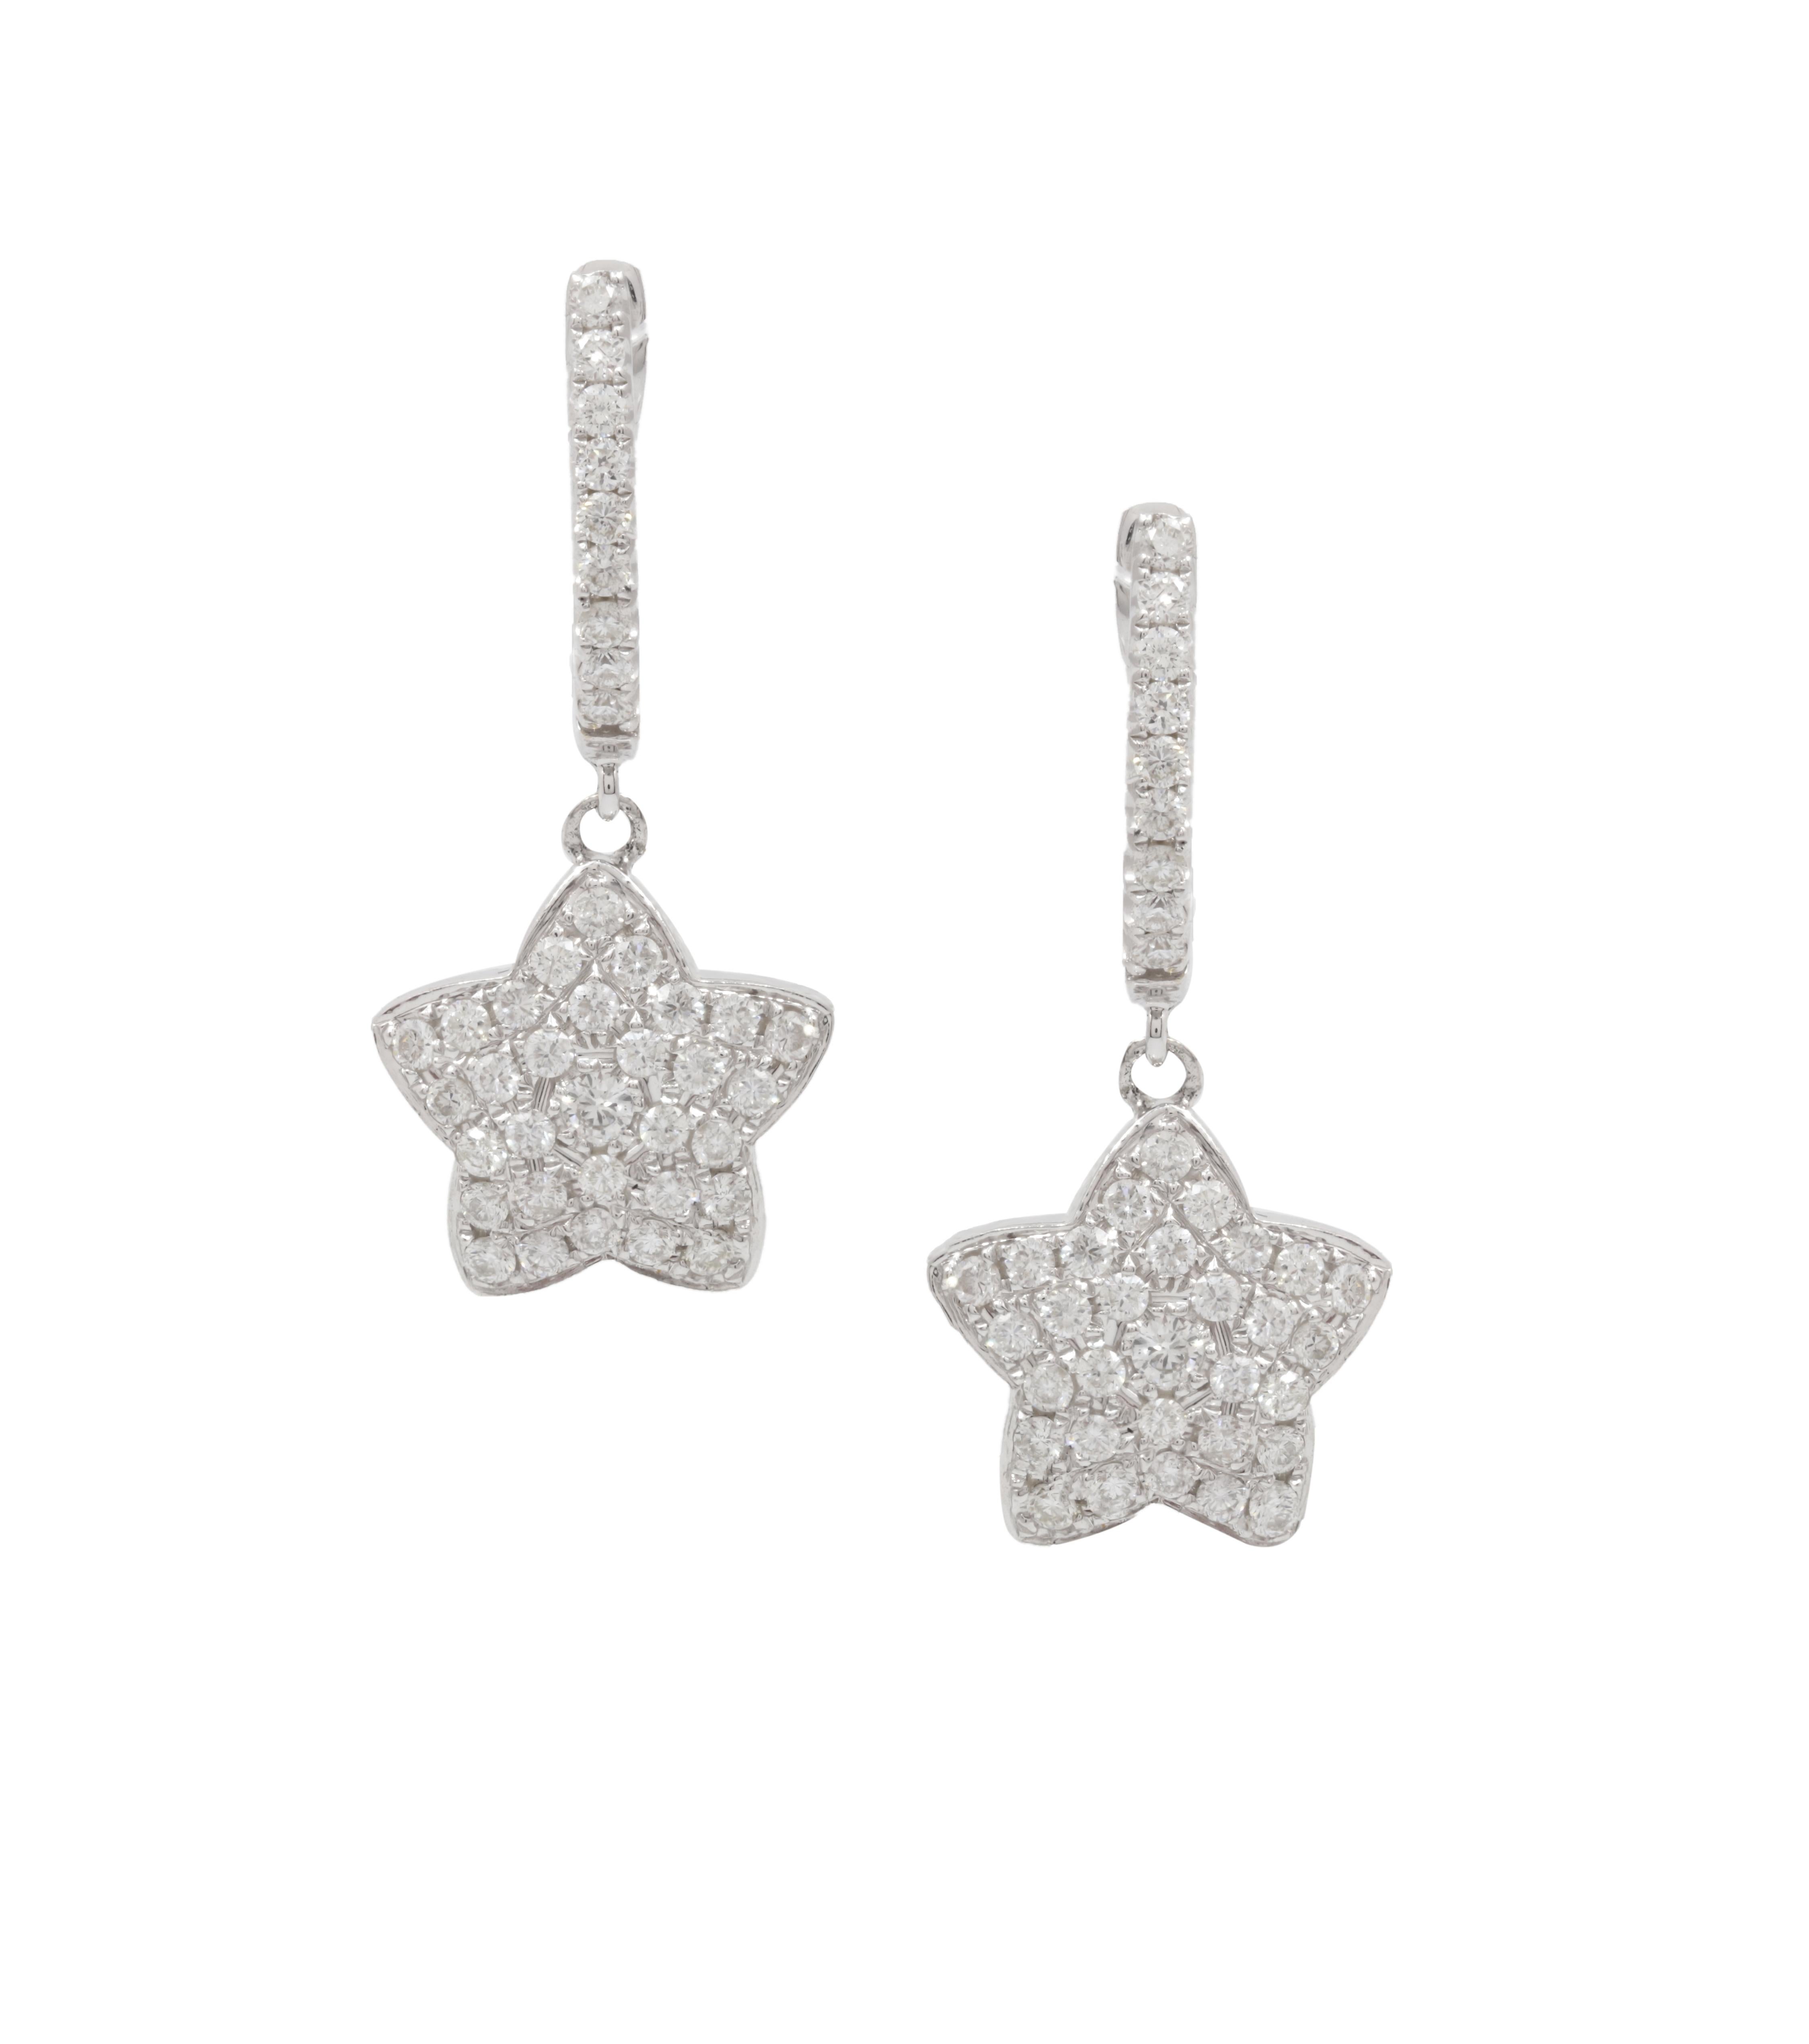 18 kt white gold diamond huggie earrings  with a star design adorned with 1.70 cts tw of diamonds.
Diana M. is a leading supplier of top-quality fine jewelry for over 35 years.
Diana M is one-stop shop for all your jewelry shopping, carrying line of